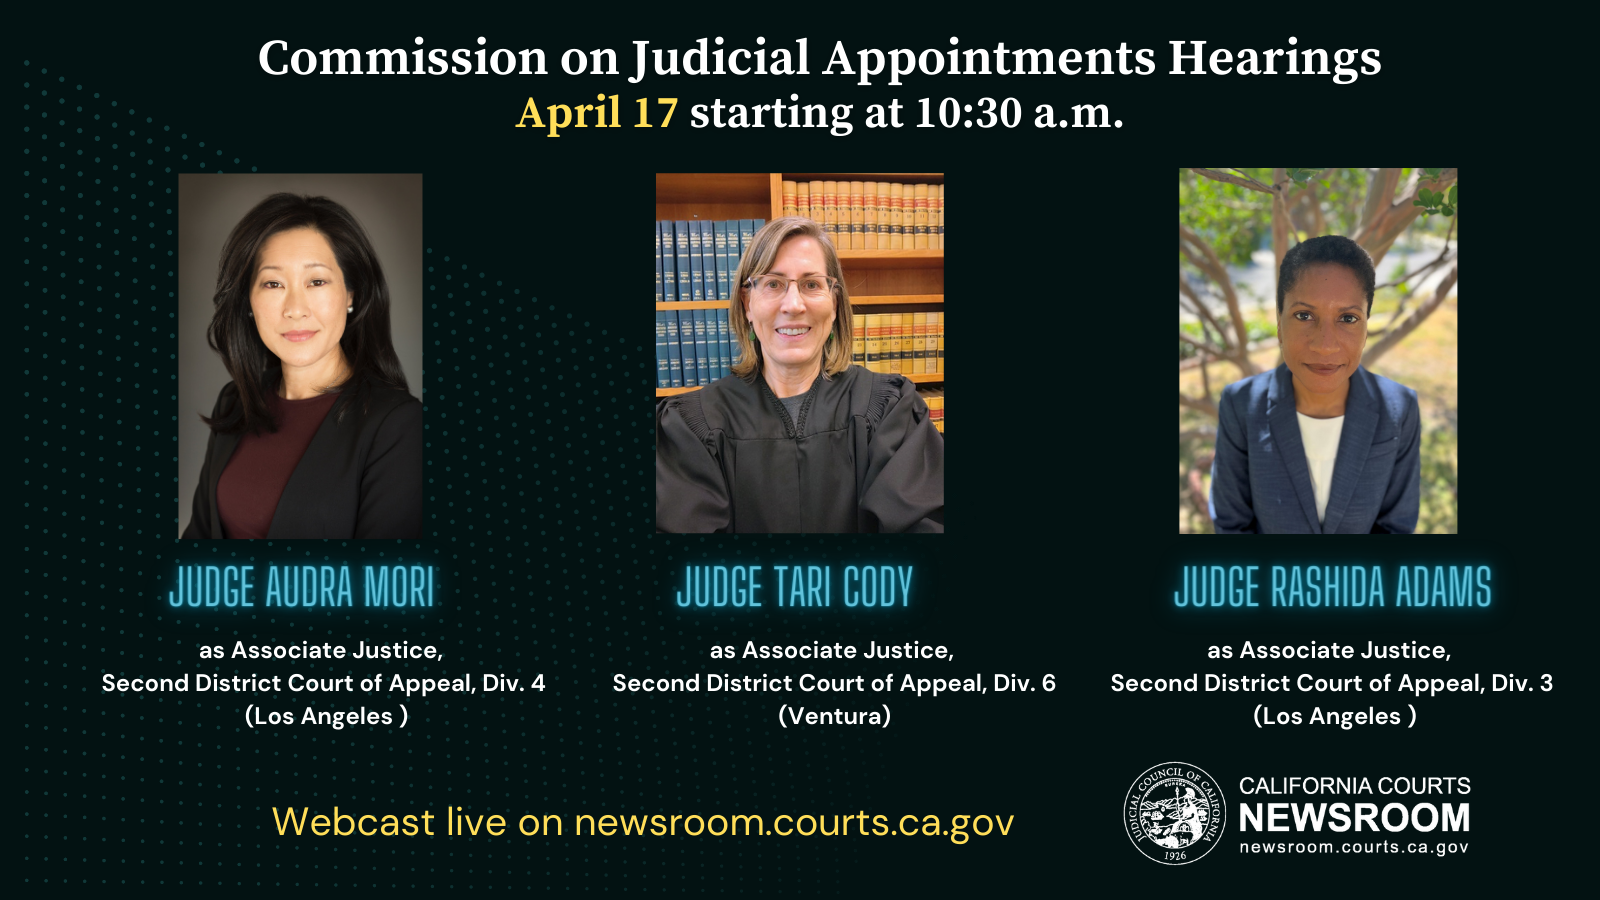 three women judges for appointment on April 17